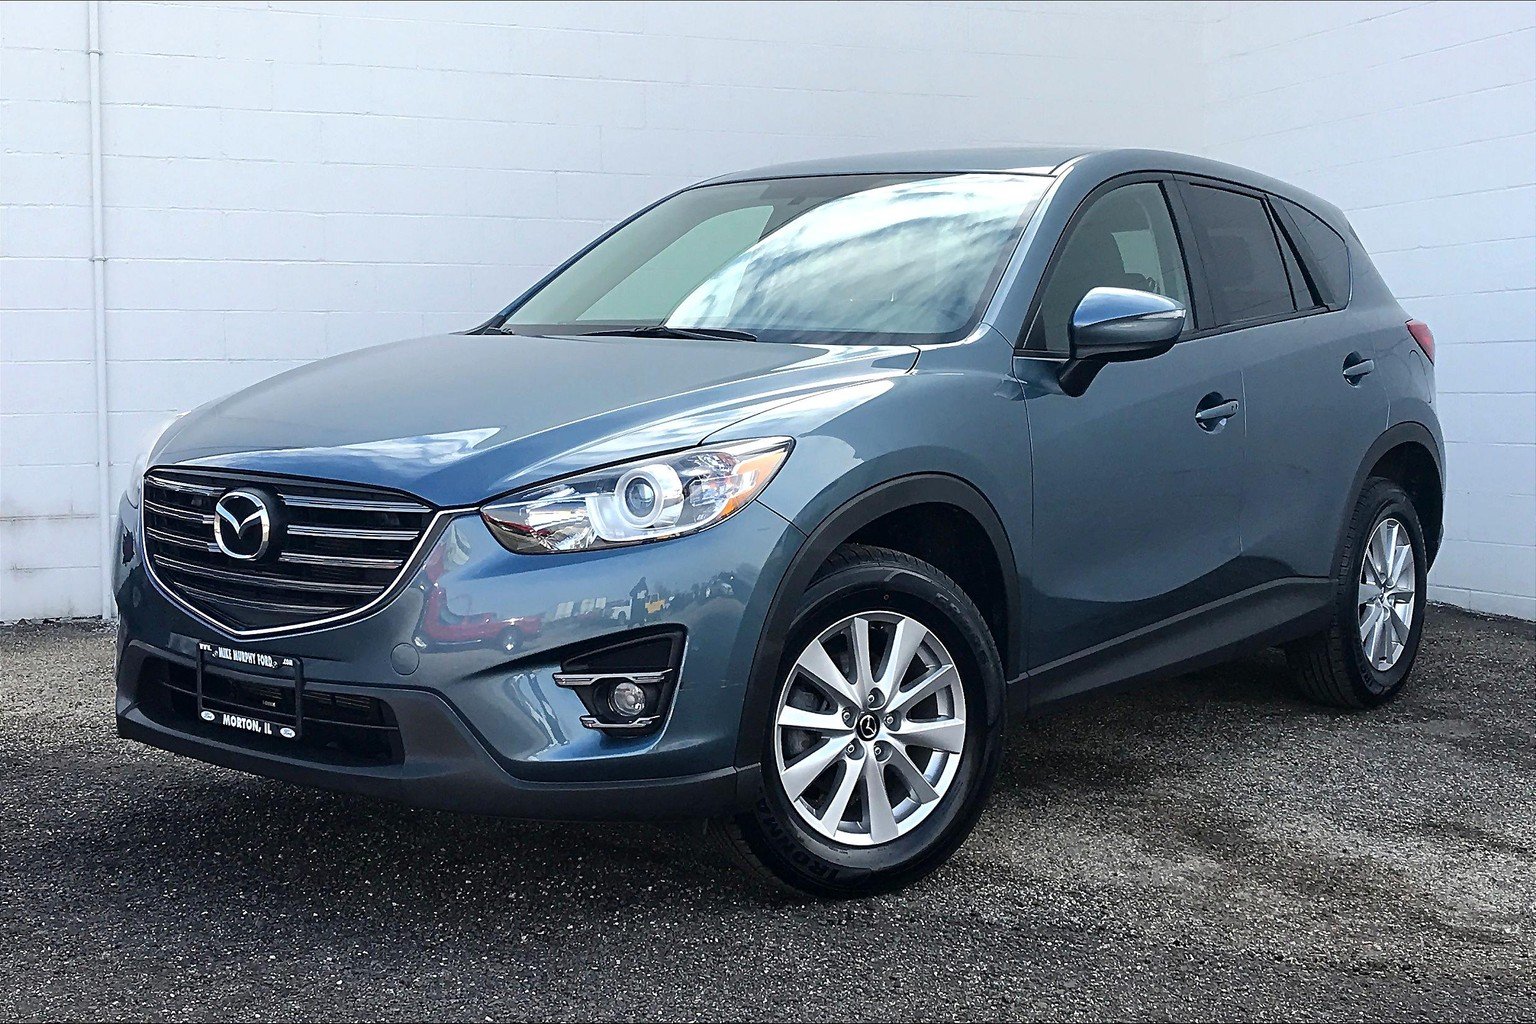 PreOwned 2016 Mazda CX5 2016.5 AWD 4dr Auto Touring 4D